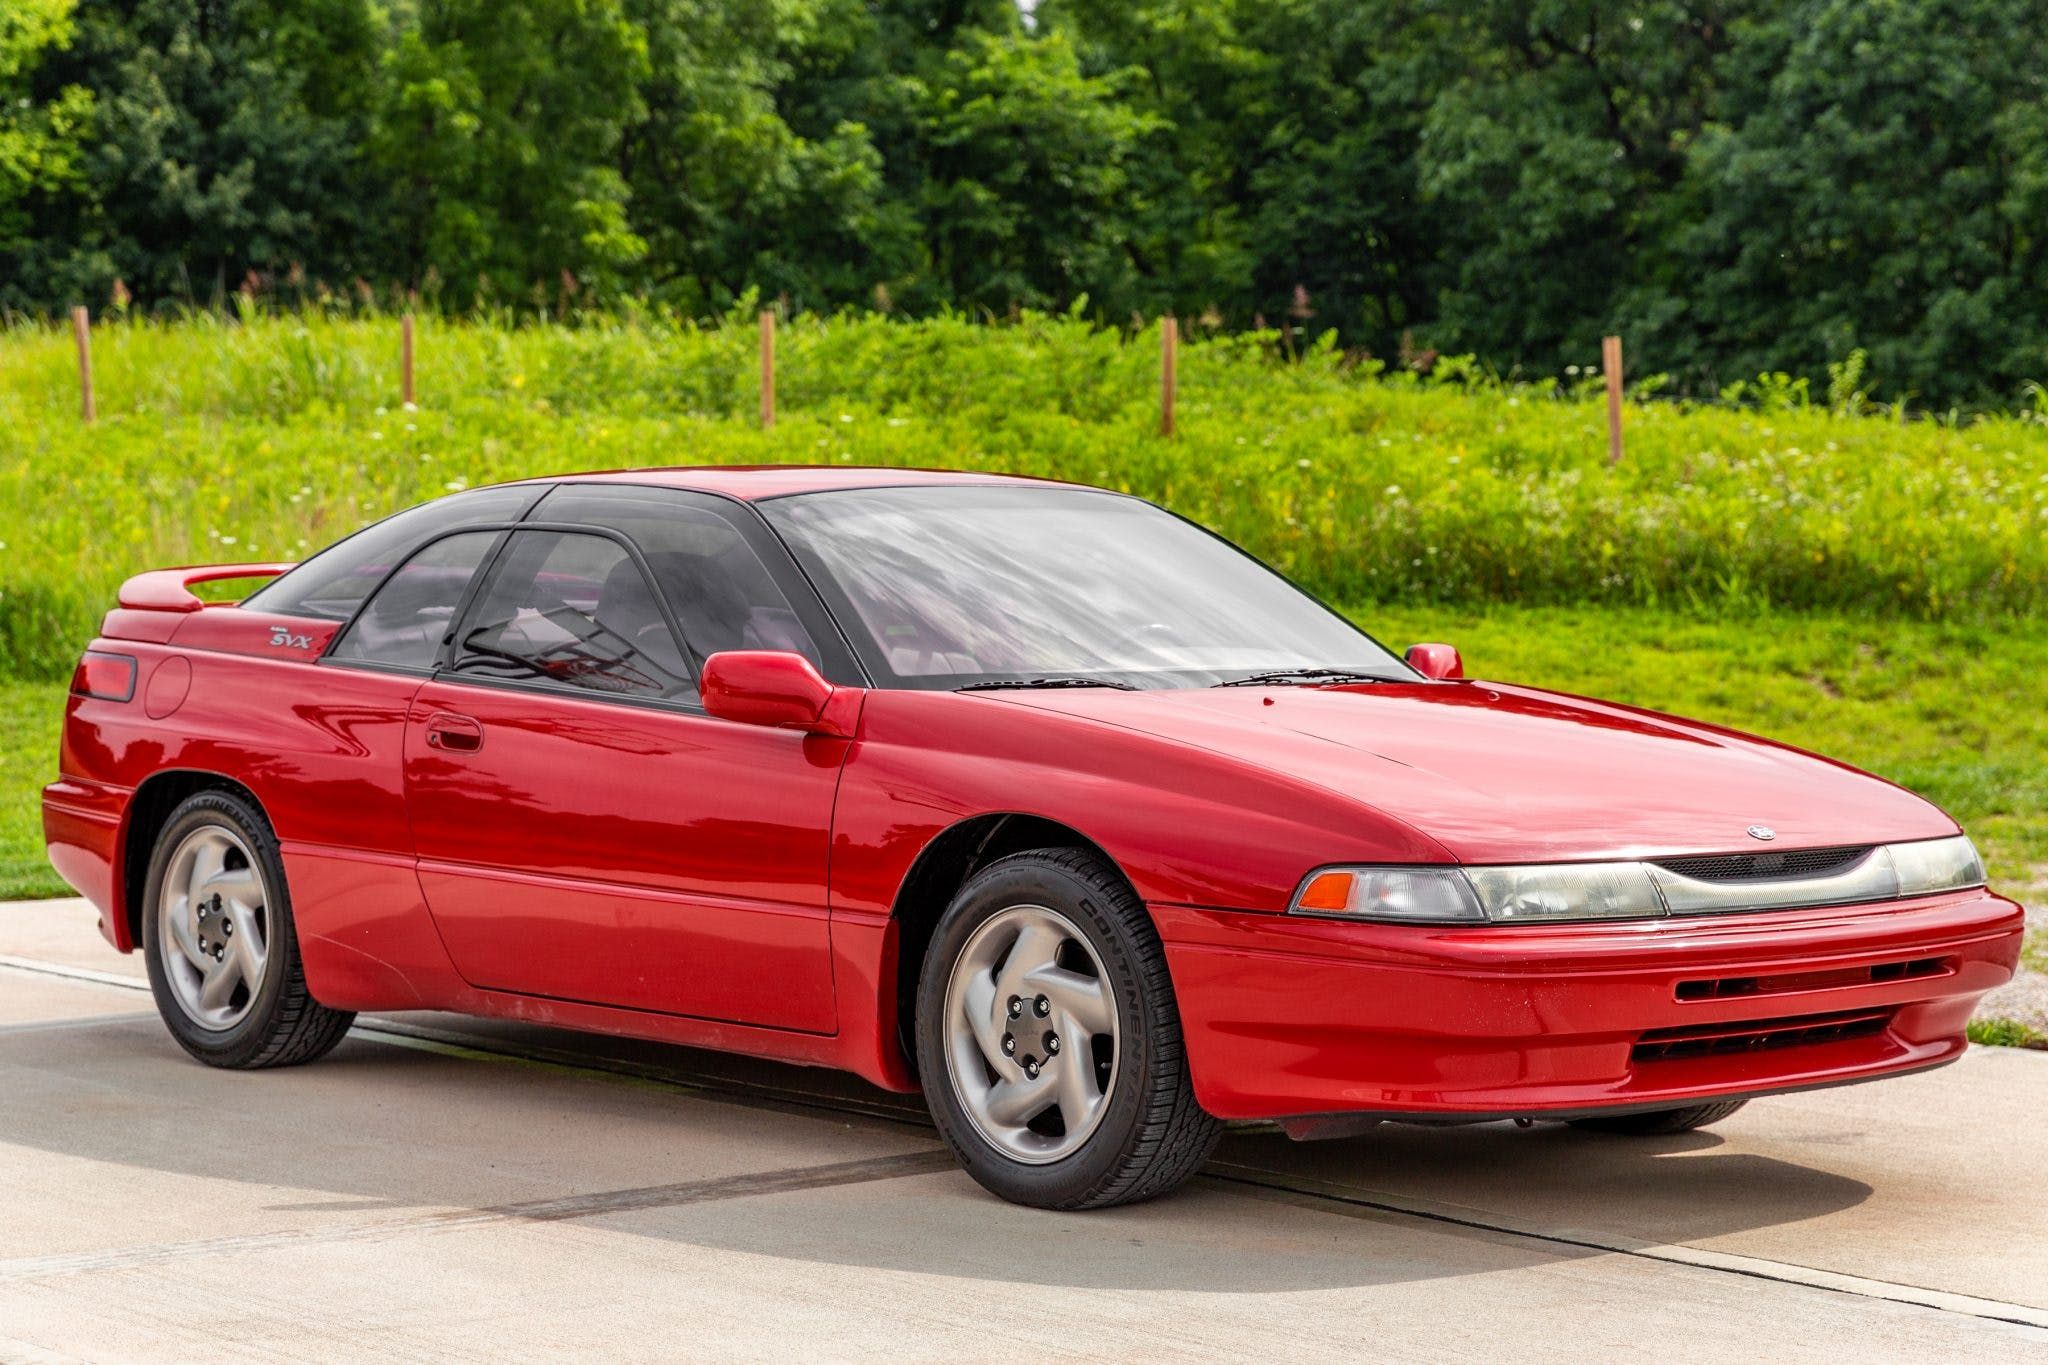 The Subaru SVX Is A Seriously Underrated Japanese Car